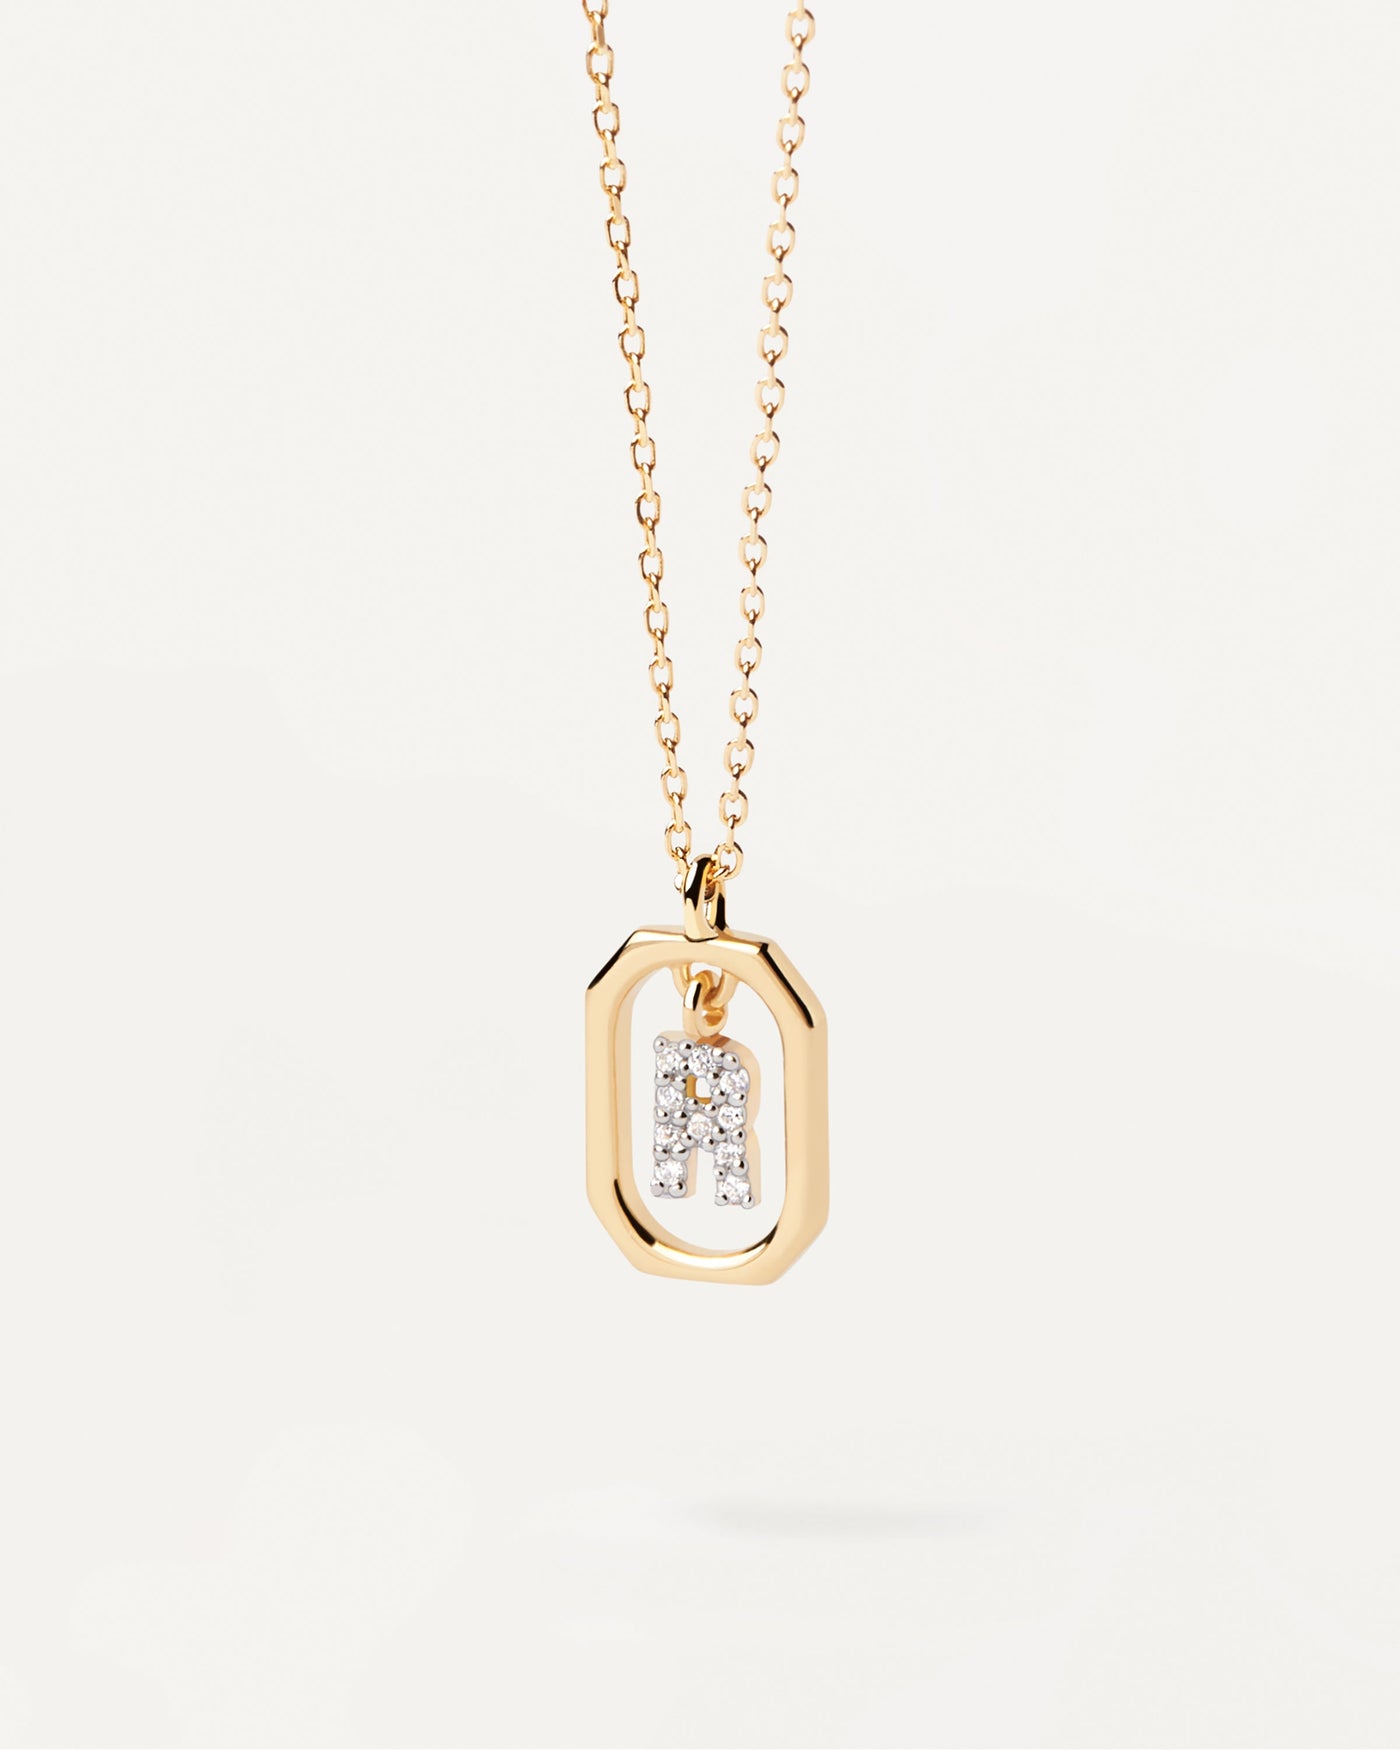 2023 Selection | Mini Letter R Necklace. Small initial R necklace in zirconia inside gold-plated silver octagonal pendant. Get the latest arrival from PDPAOLA. Place your order safely and get this Best Seller. Free Shipping.